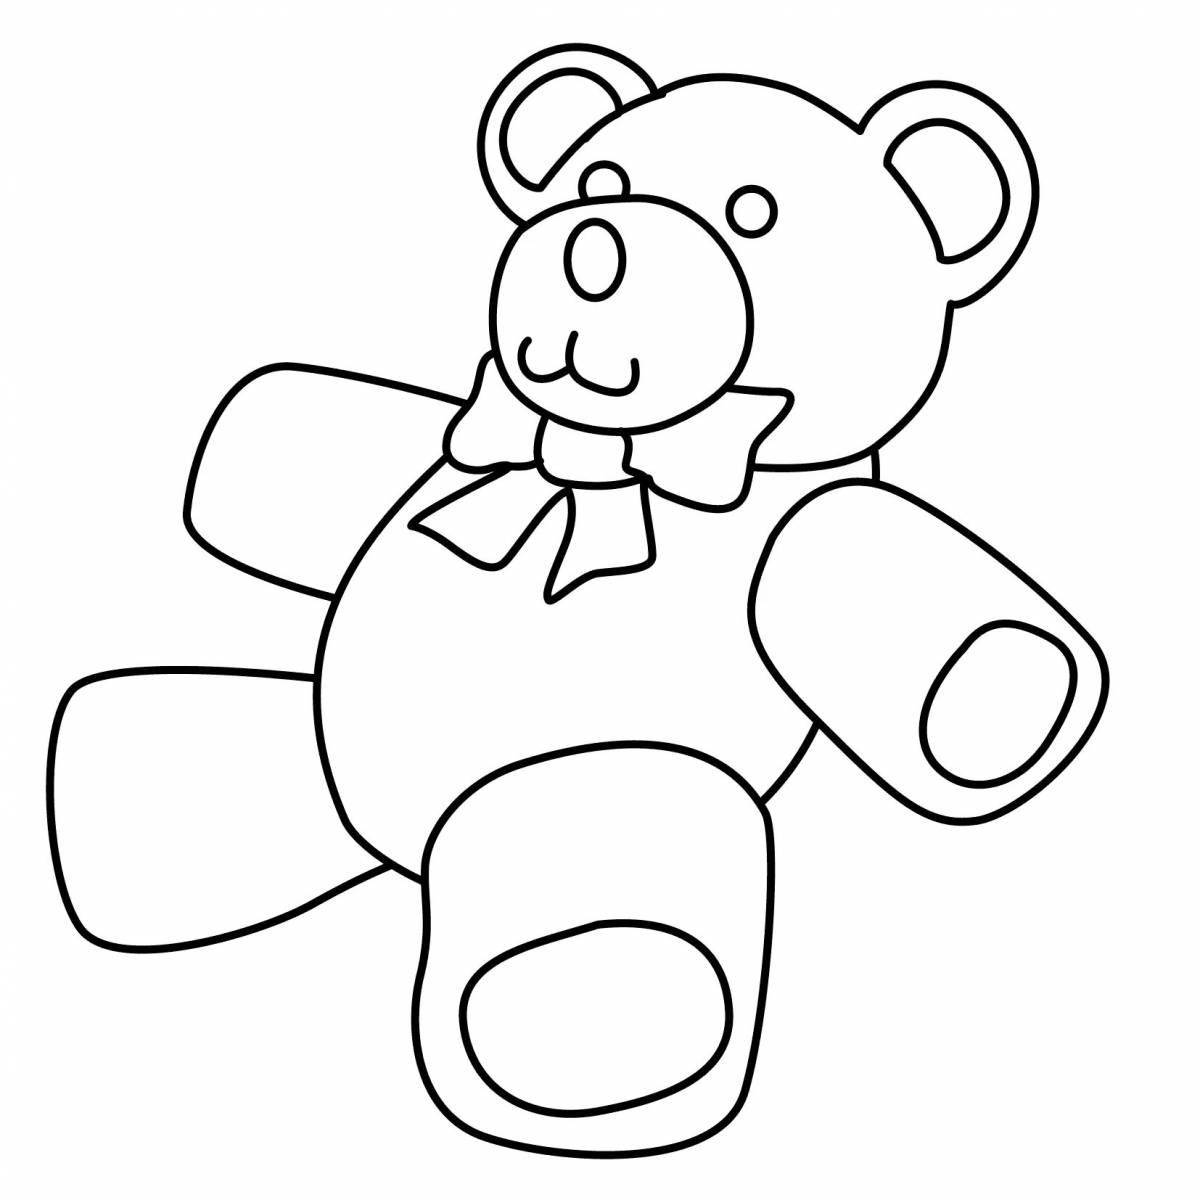 Coloring book bright bear toy